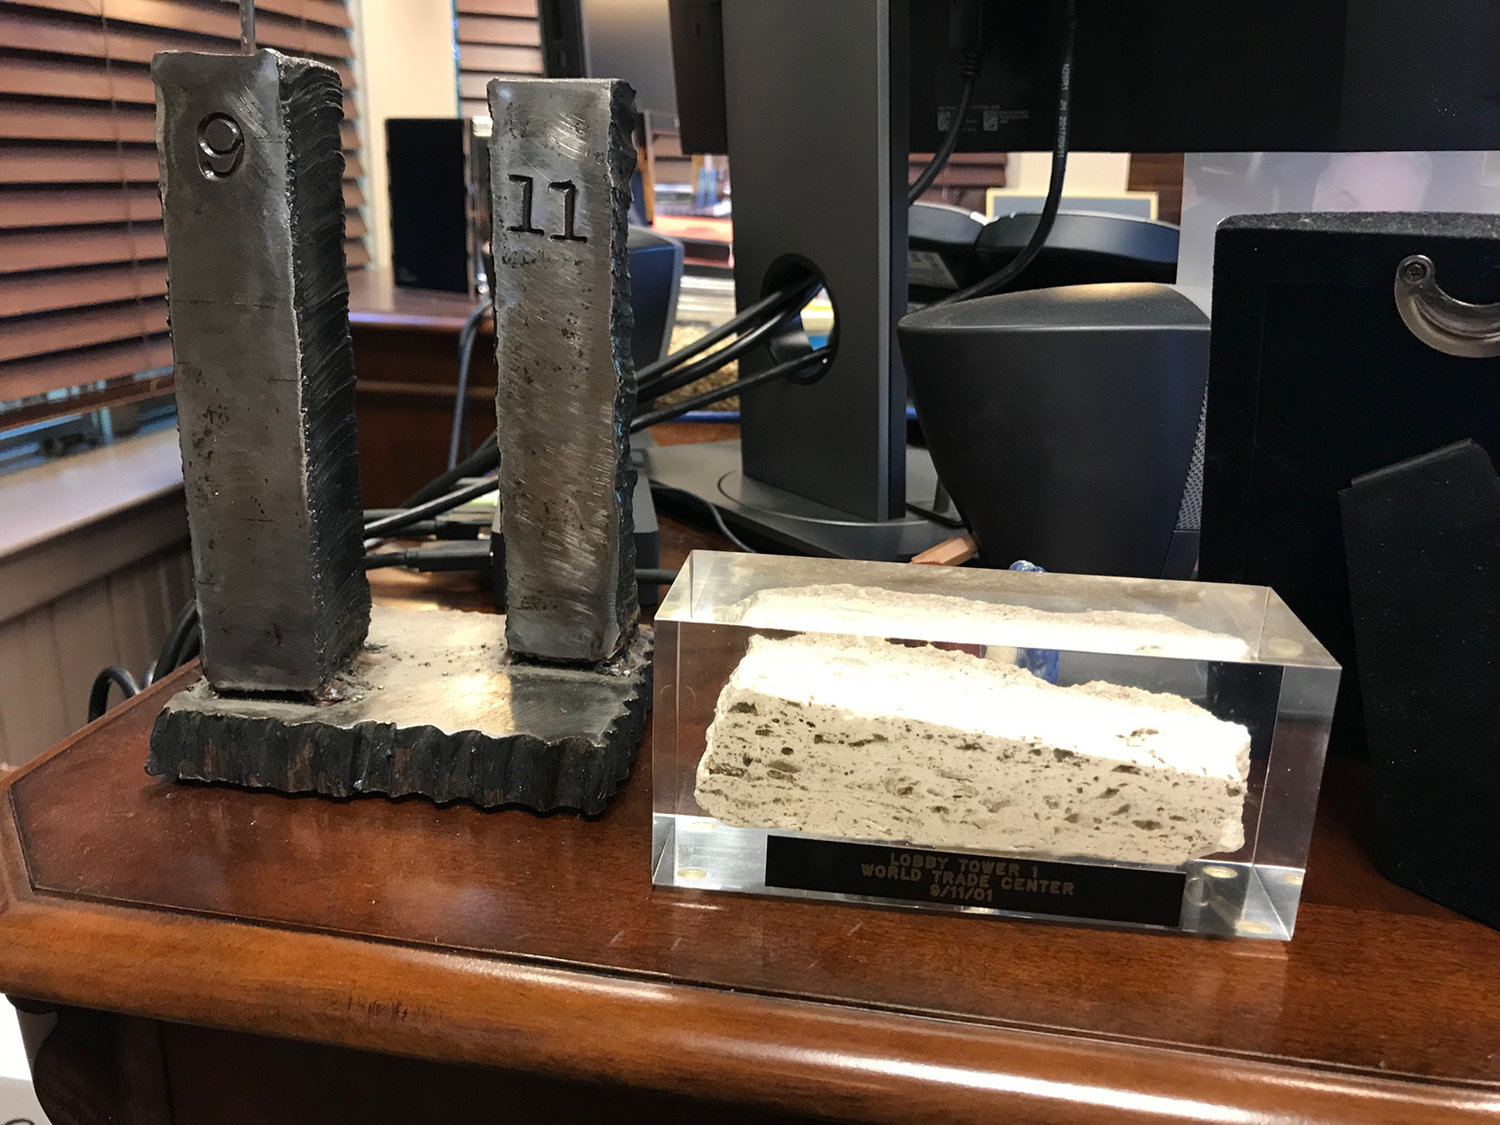 REMINDERS OF THE TRAGEDY: On Paul Nunziato’s desk sit a model of the towers sculpted from steel recovered from the wreckage of the World Trade Center and a plastic box containing a section of the marble floor from the lobby of Tower 1. The president of the PAPD union hardly needs the reminders; 17 years later, he is still dealing with the fallout from ‘the single worst day in the history of law enforcement in the United States.’